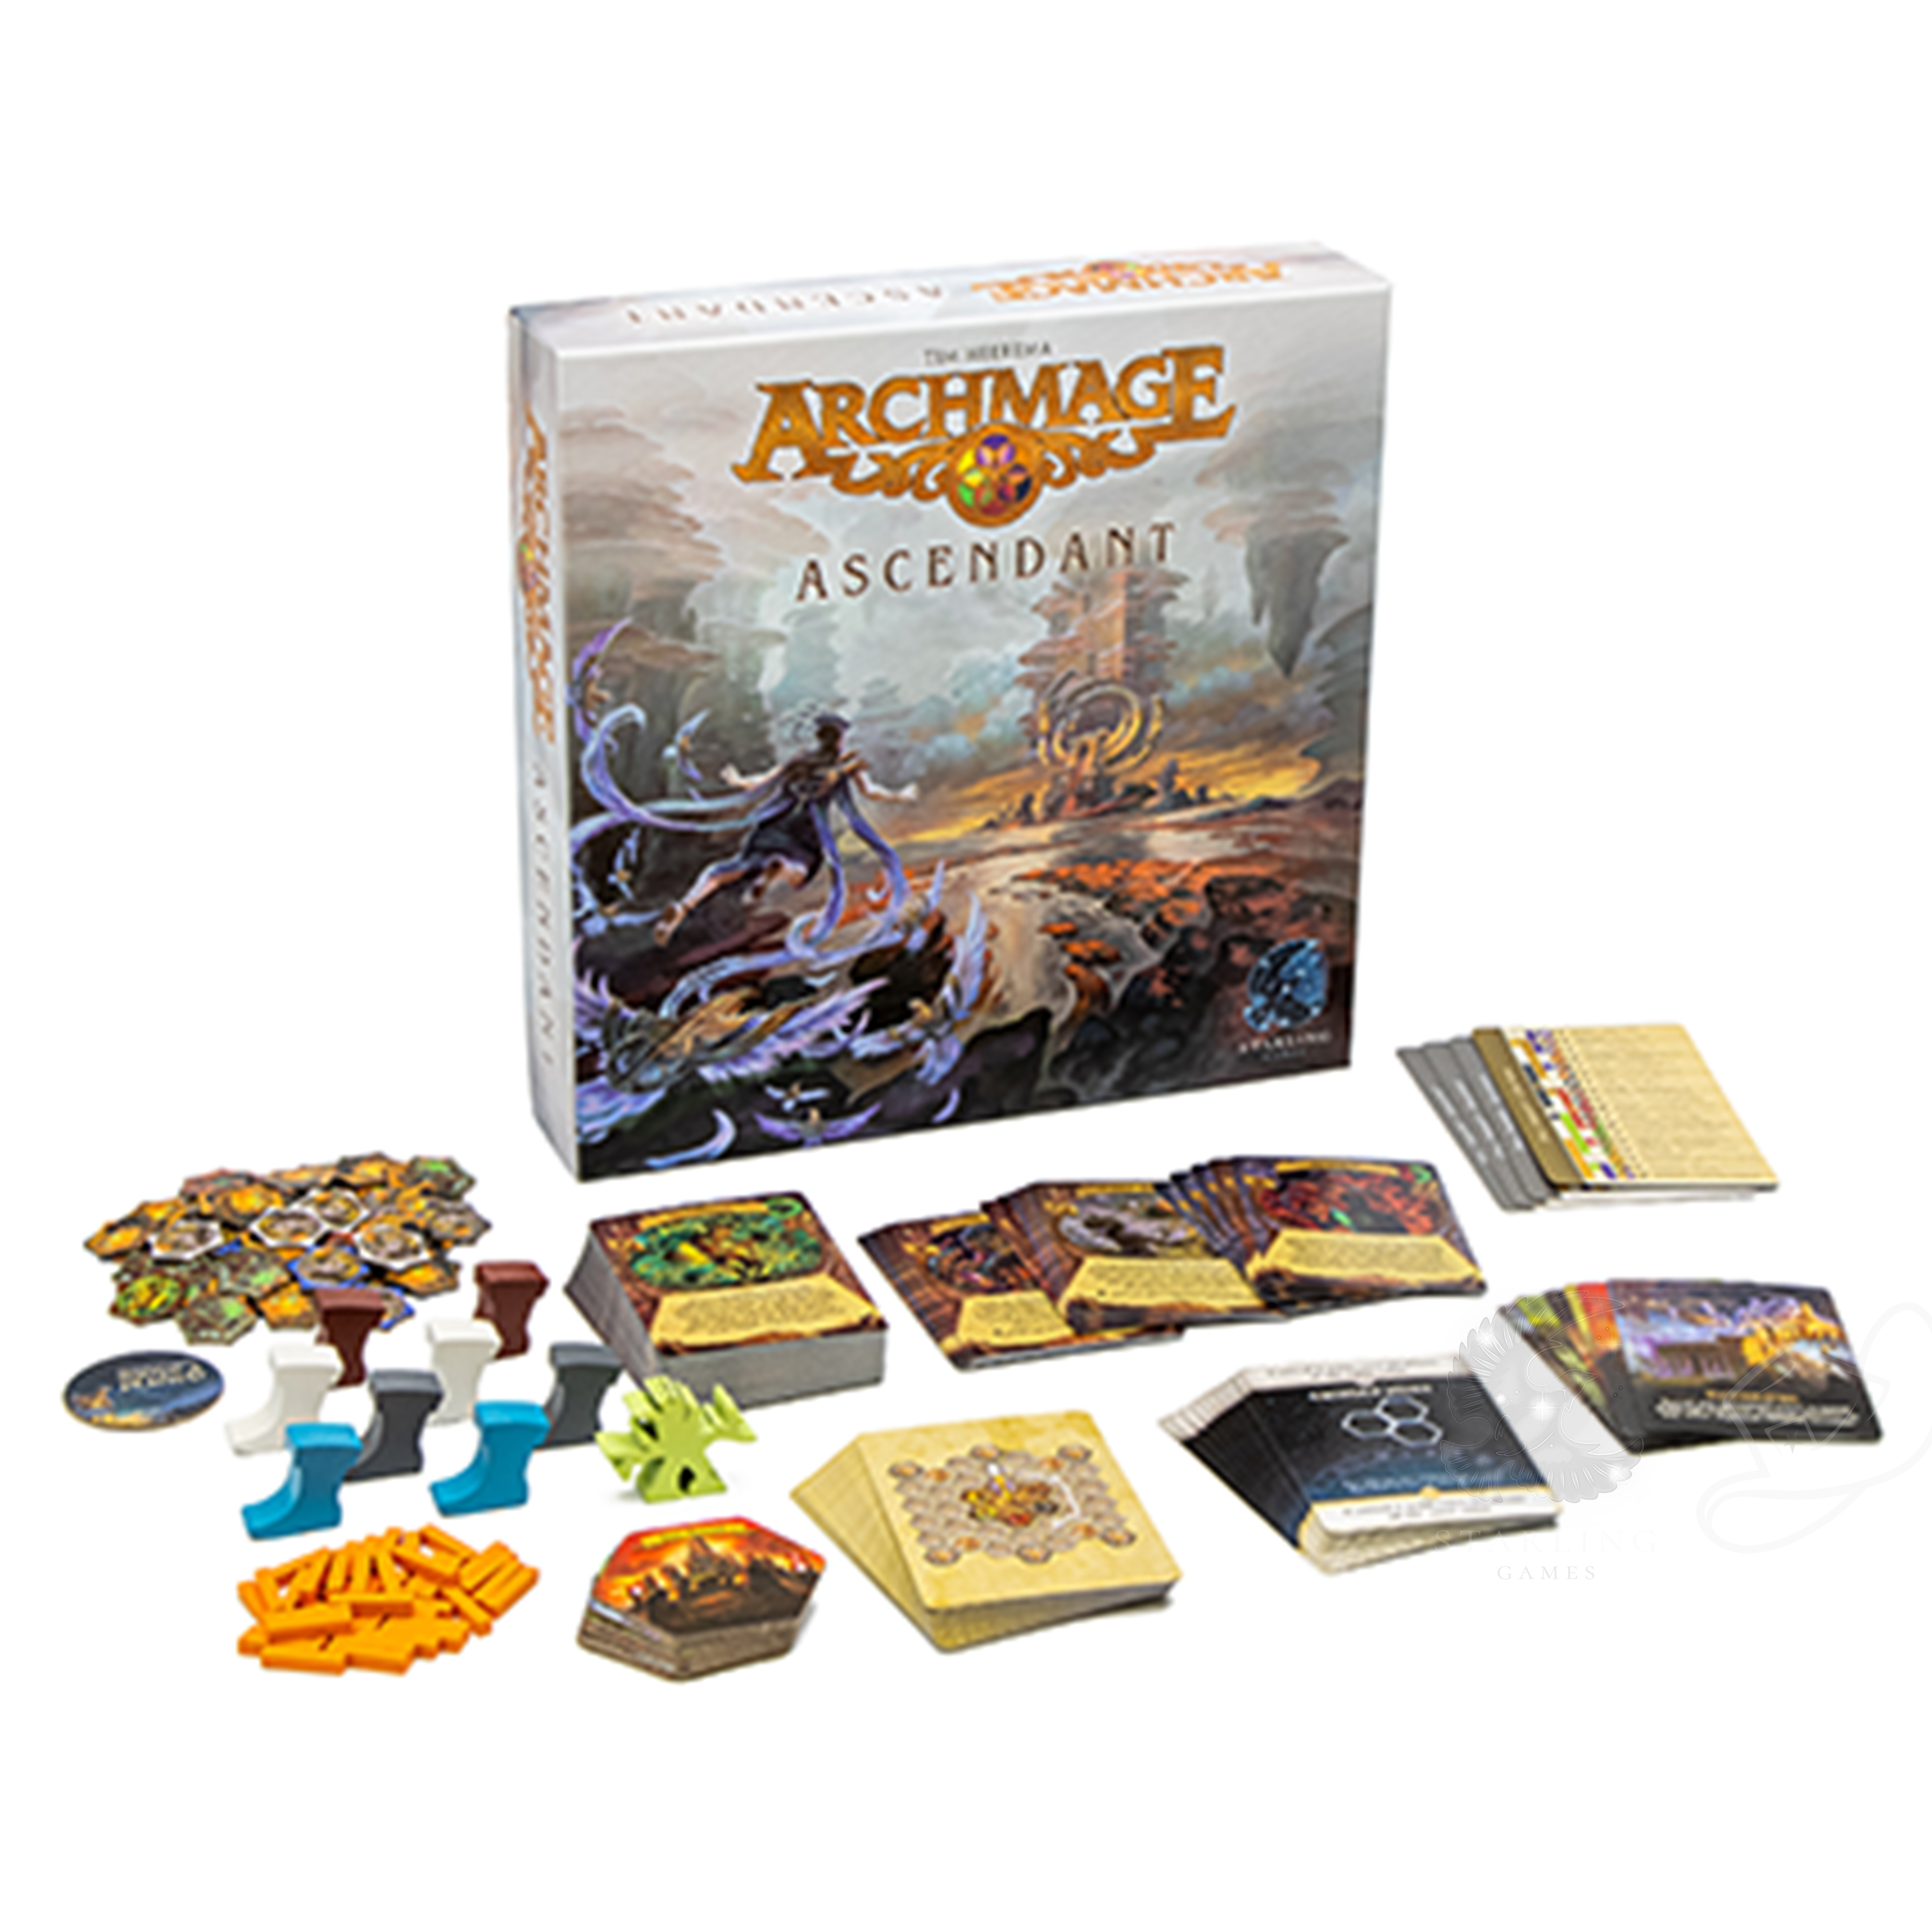 Archmage board game expansion Ascendant pieces cards board and minis